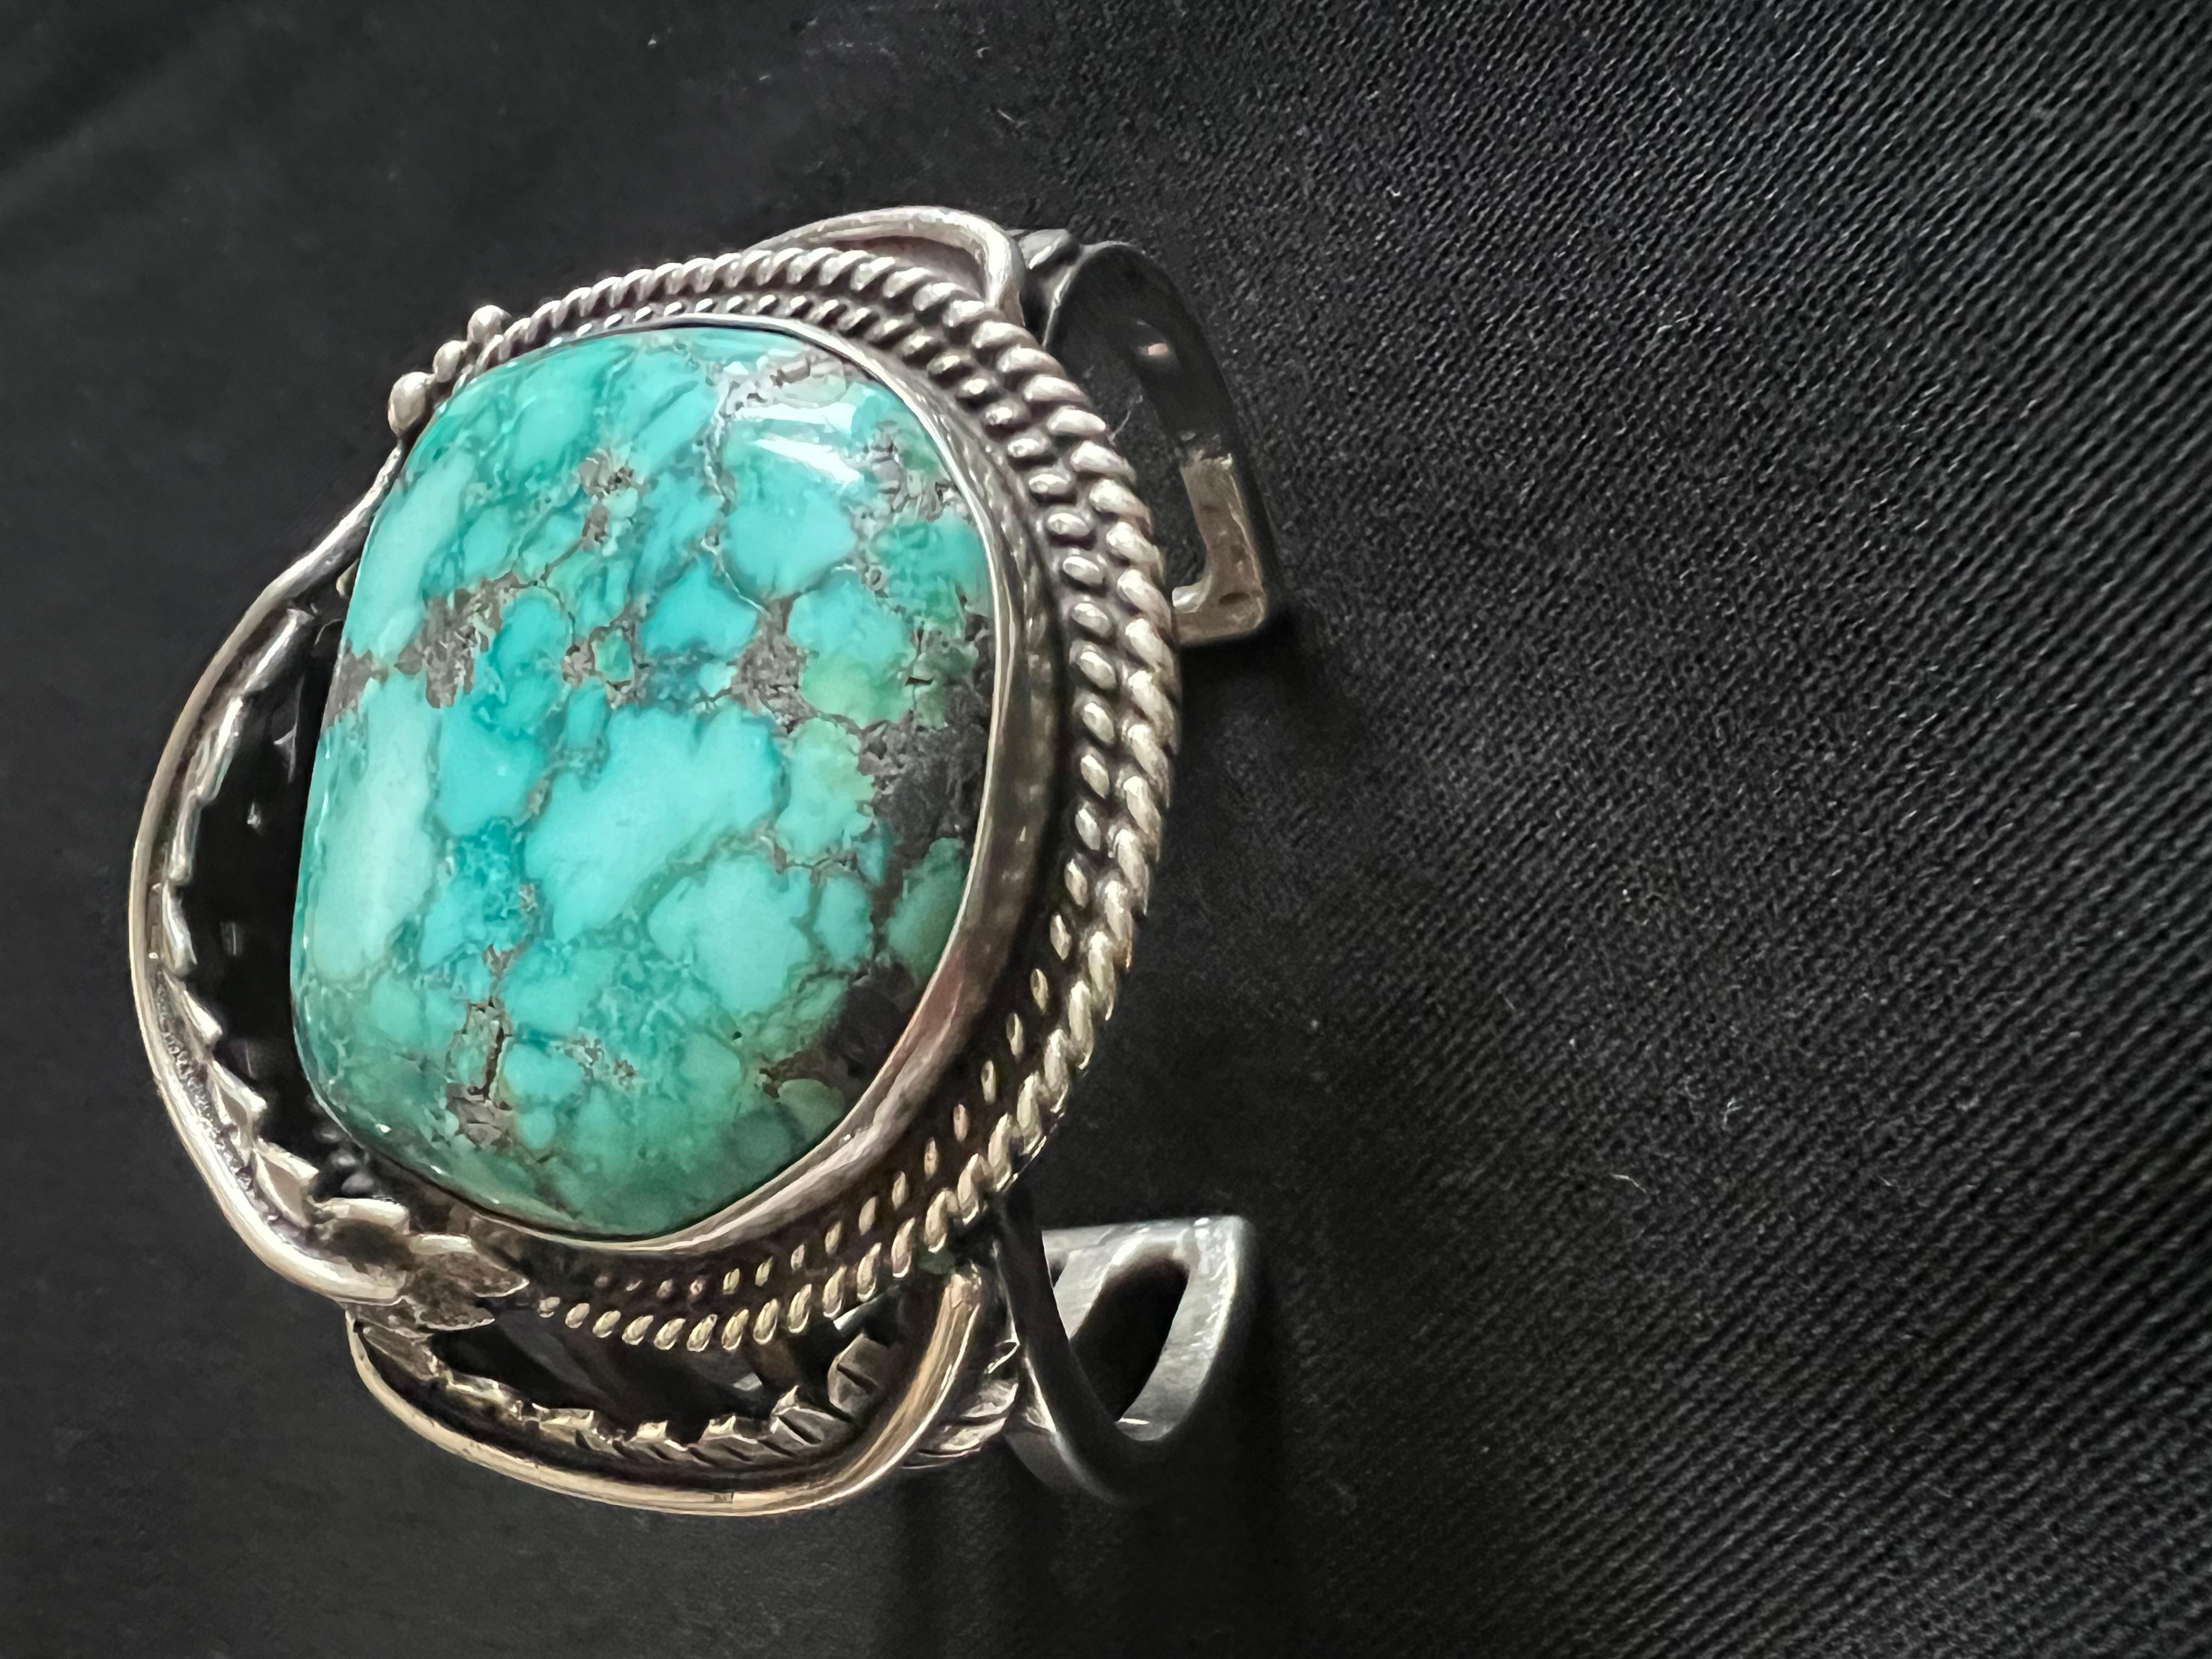 This rare, handmade turn of the century Native American Cuff was purchased from the “Old Man” at the Pawn Stars shop in Las Vegas.  An incredible work of art, a collectors showpiece that will continue to increase in value. There are no markings on